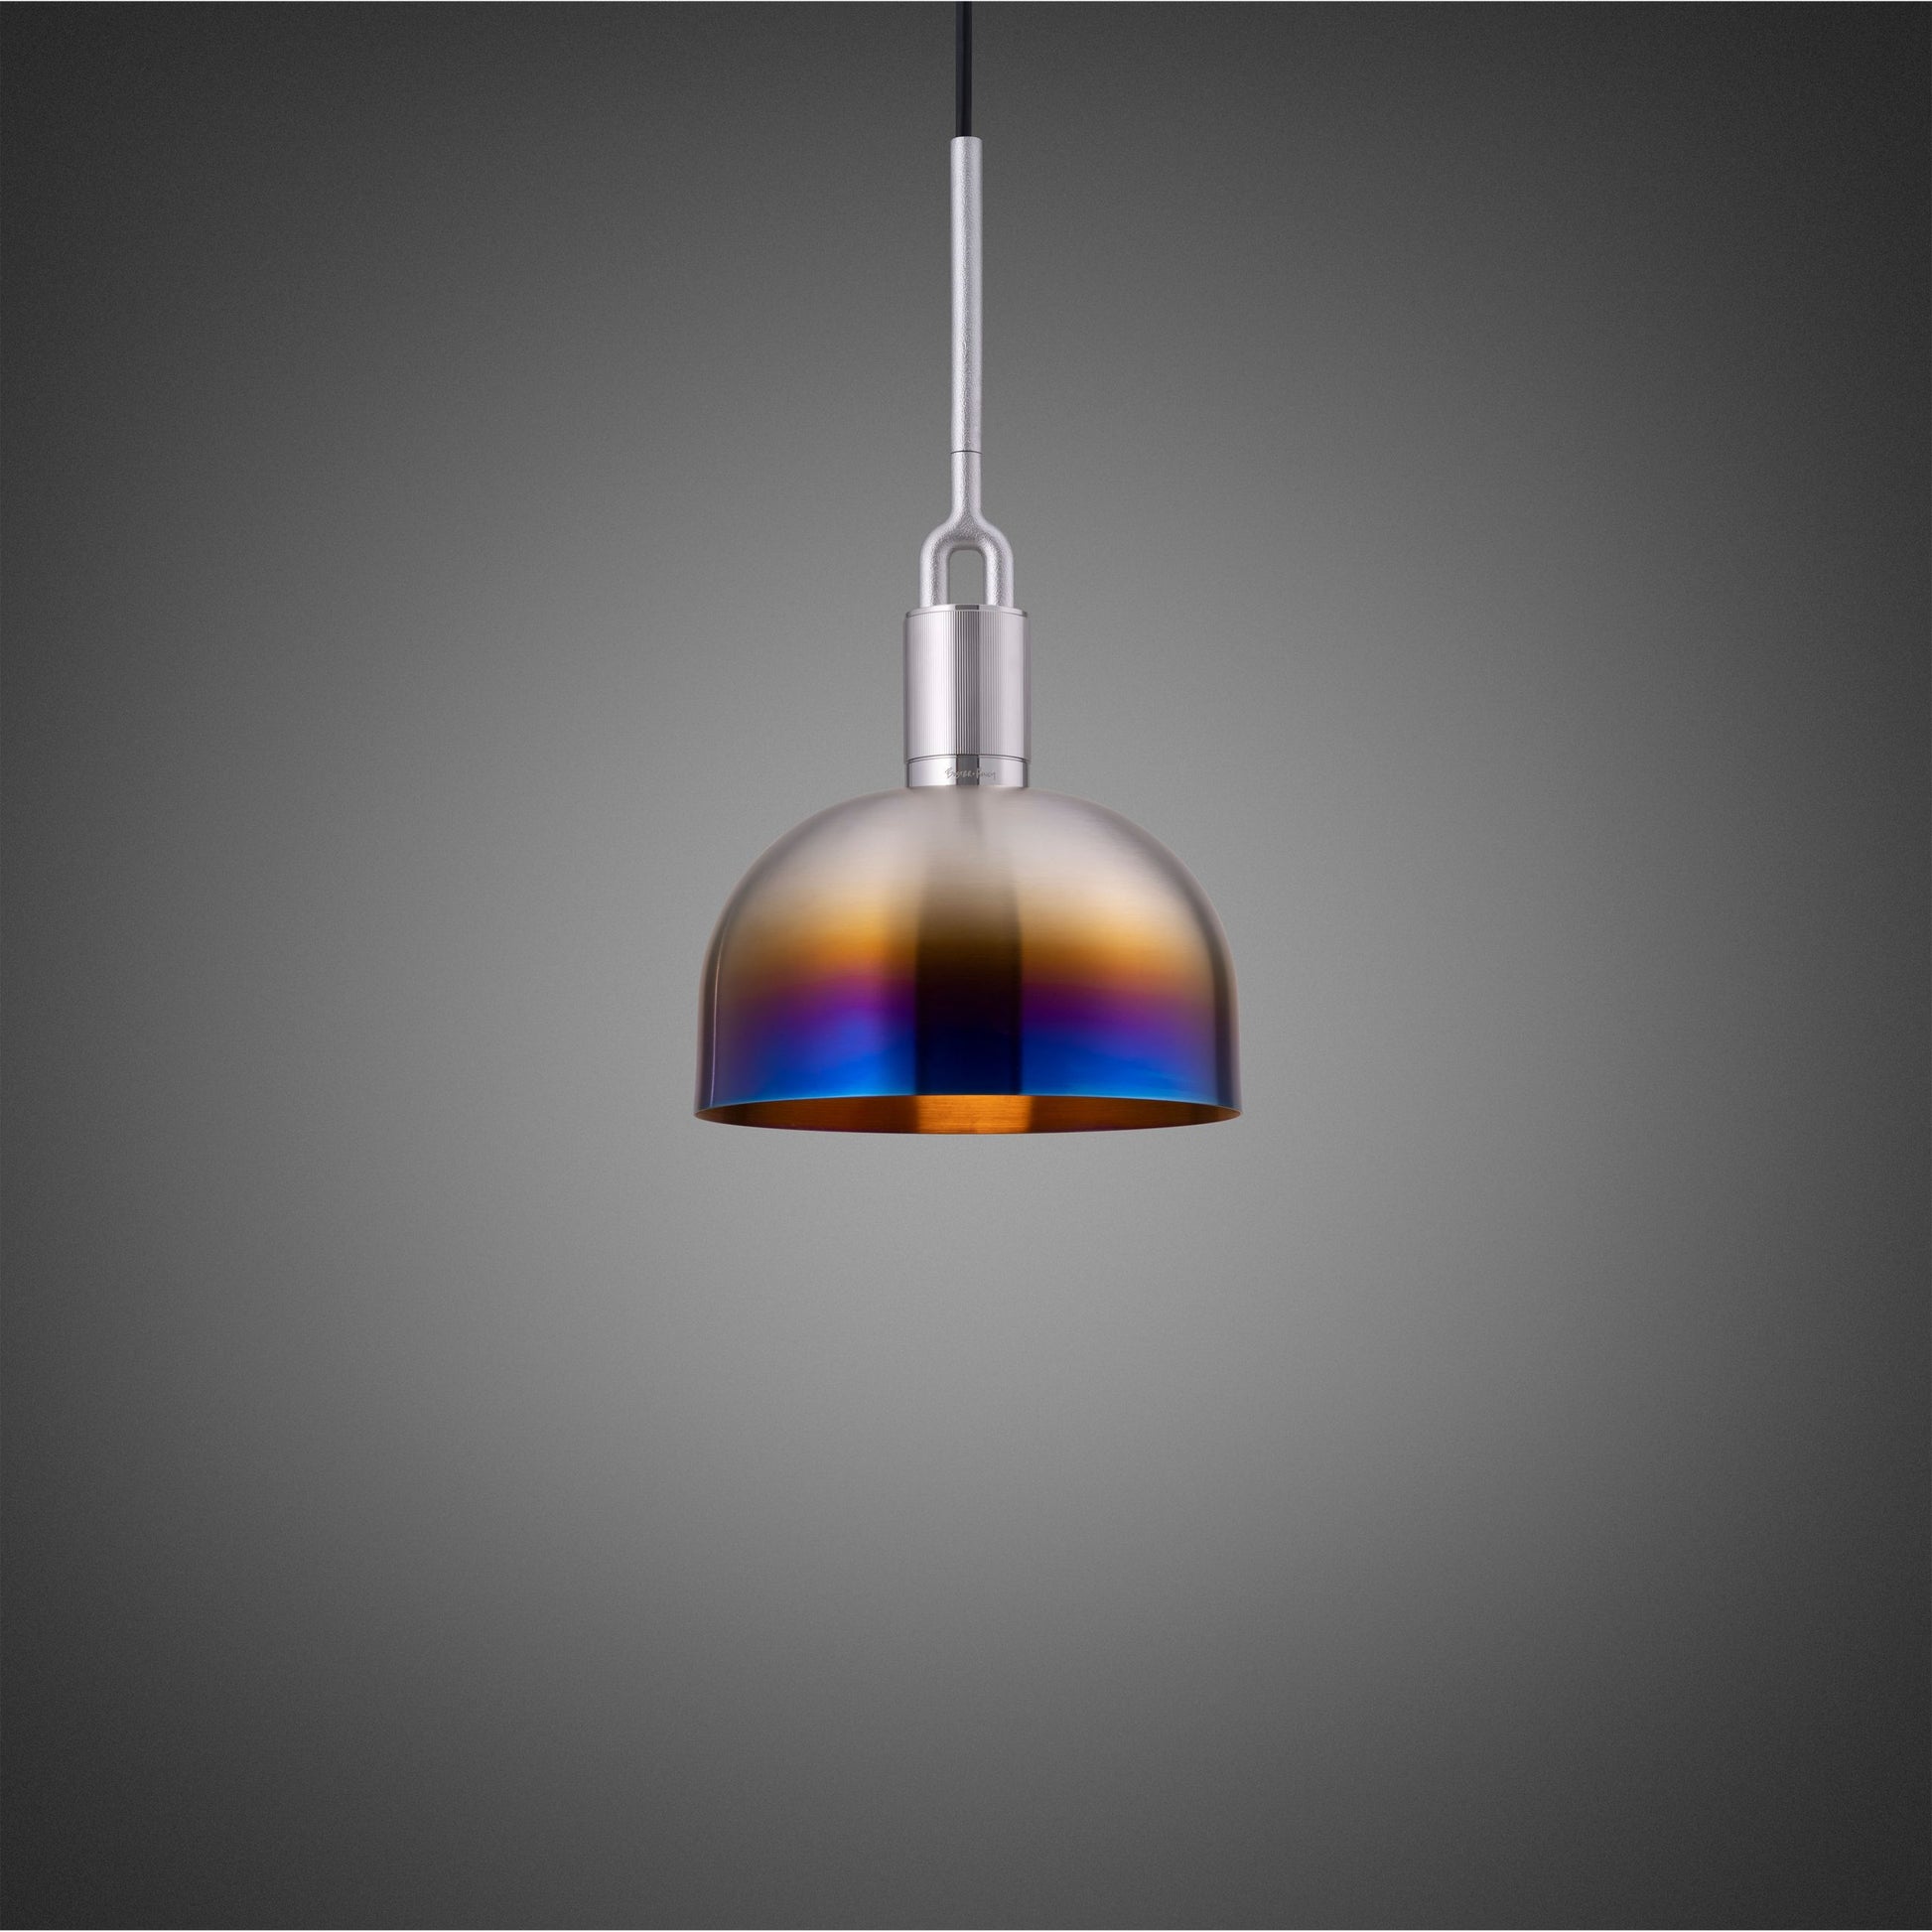 Forked Pendant Light / Shade / Medium burnt steel, front view.